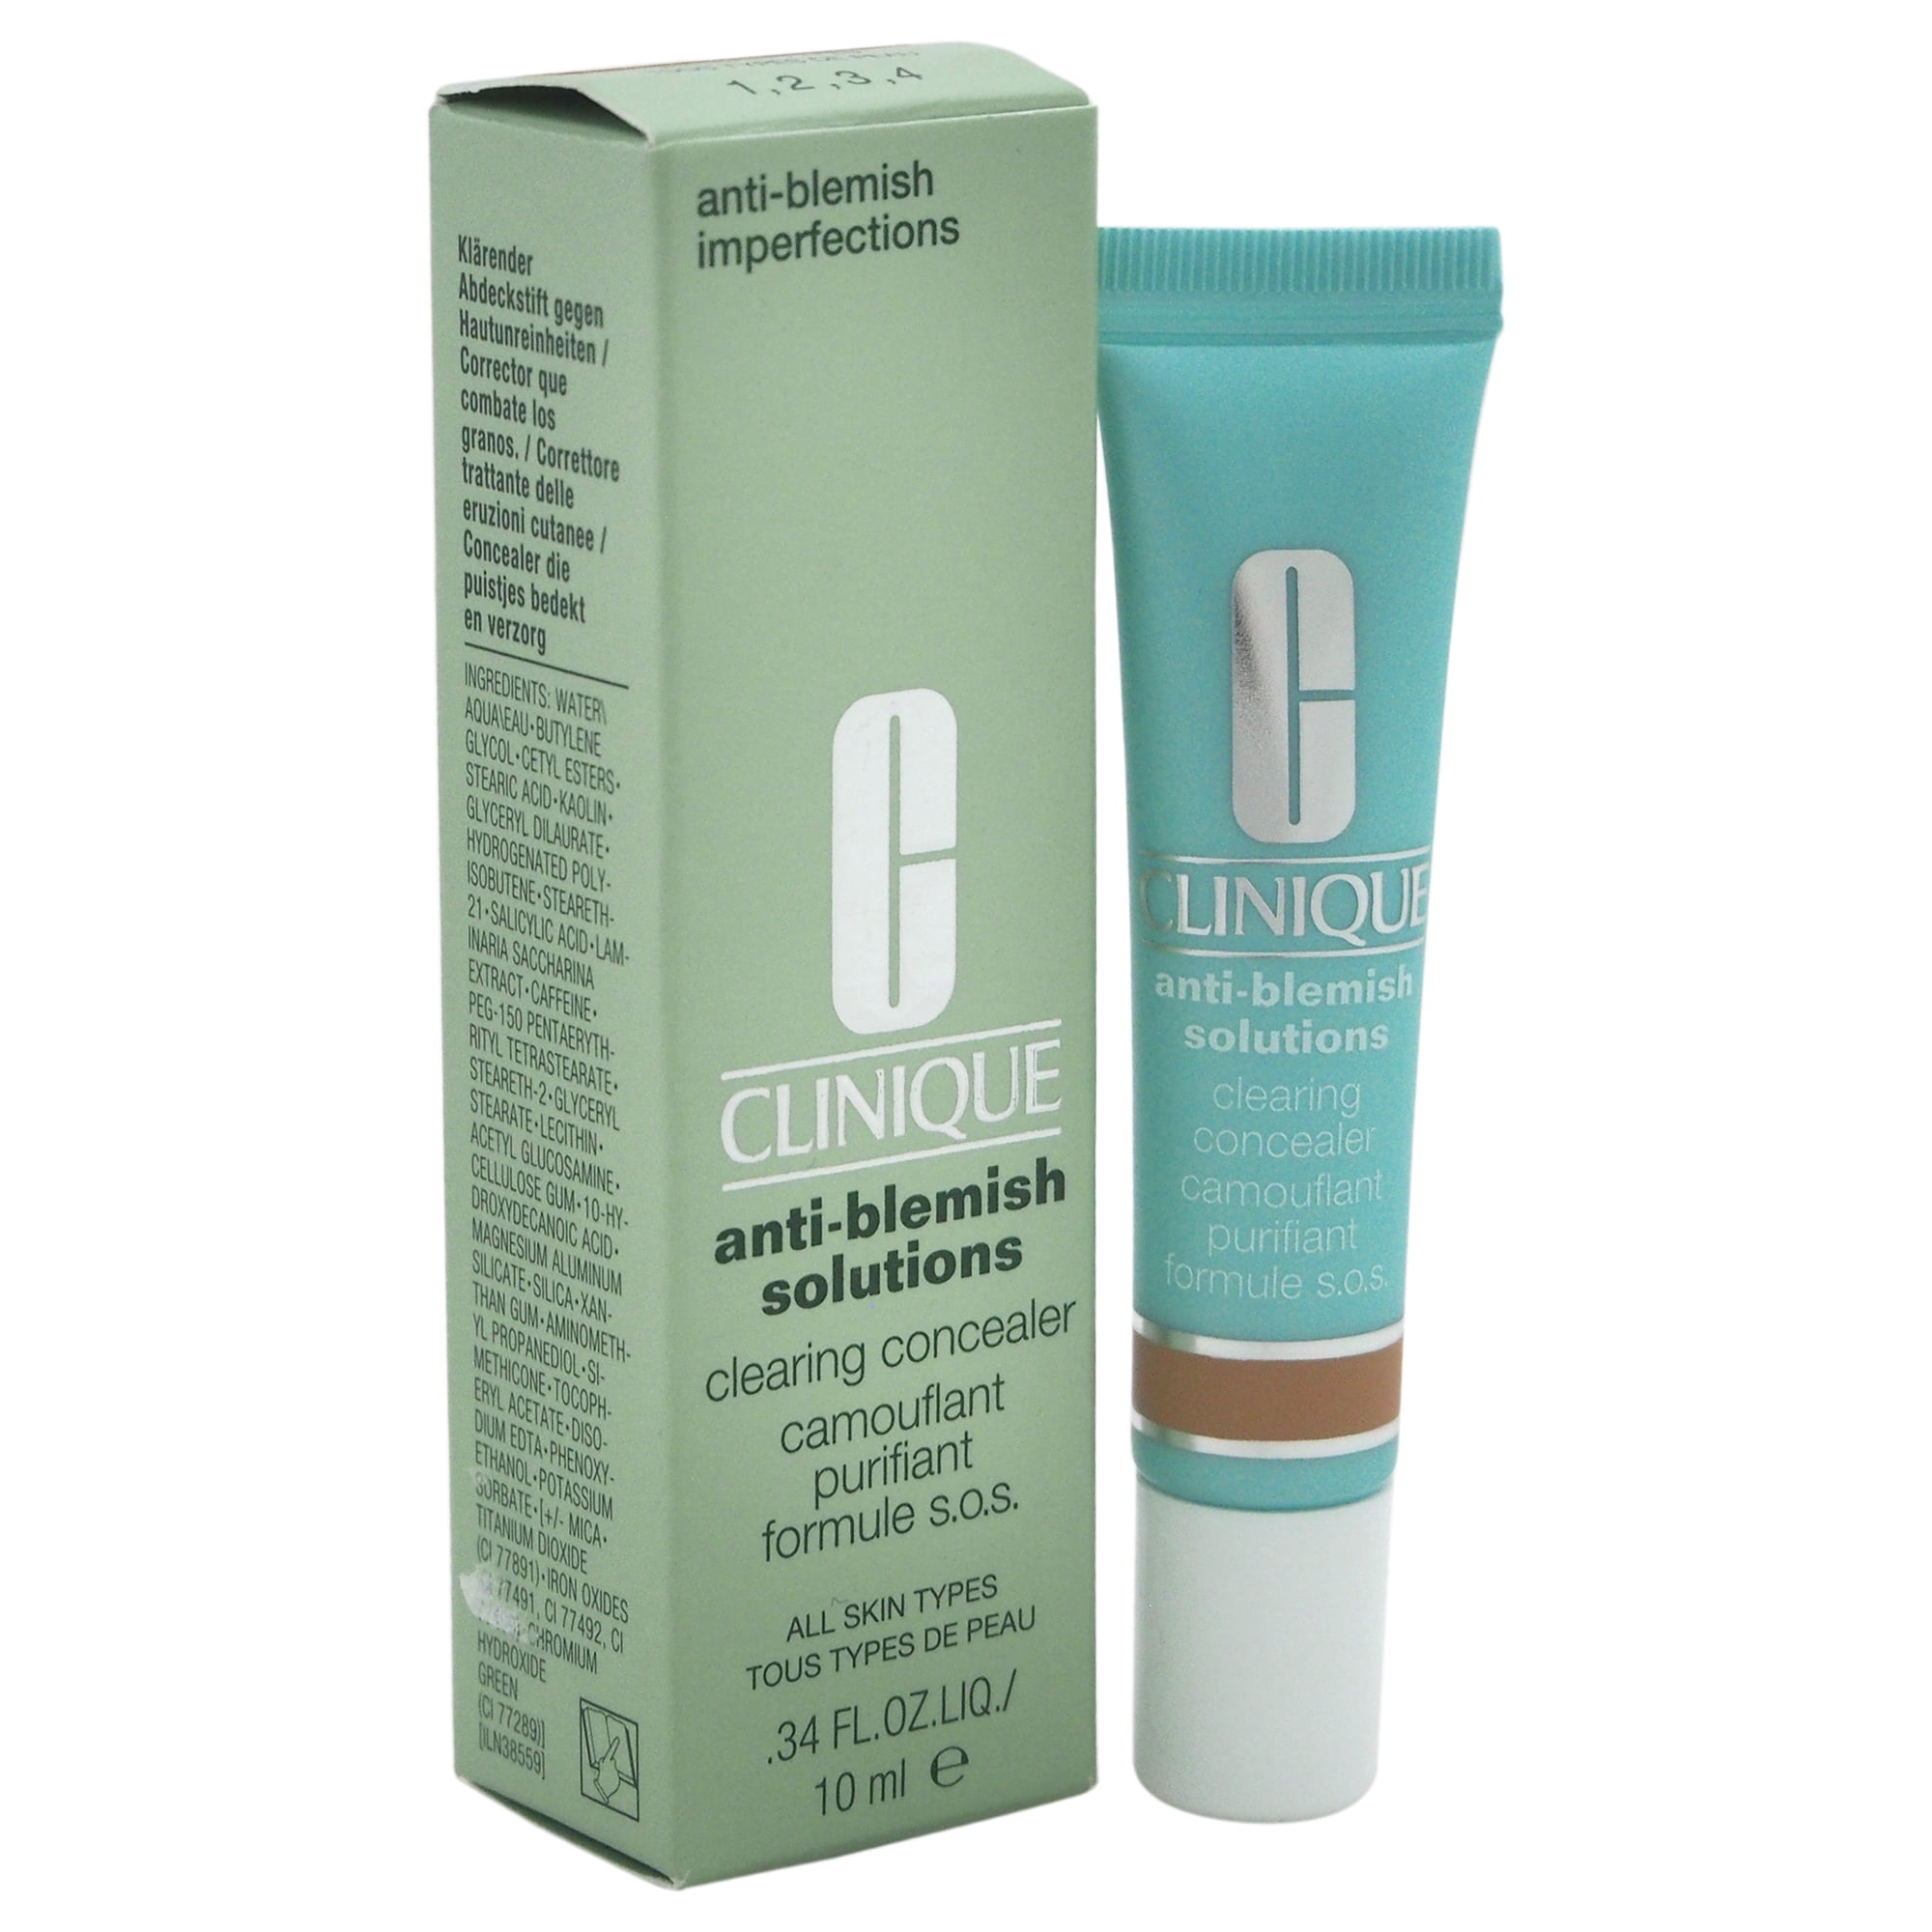 Anti-Blemish Solutions Clearing Concealer - # 03 Shade by Clinique for Women - 0.34 oz Concealer -